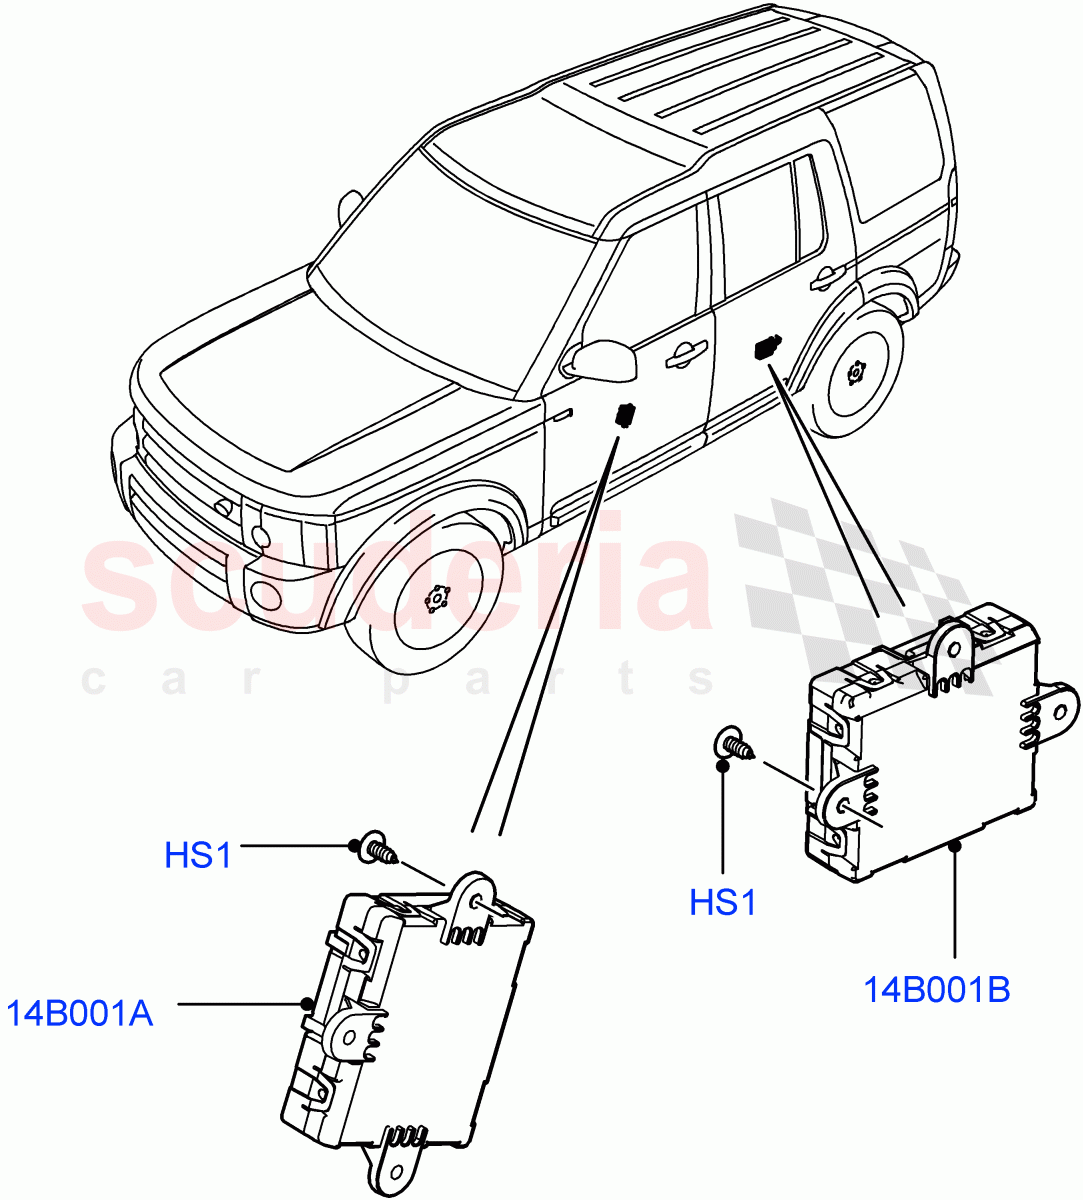 Vehicle Modules And Sensors(Door)((V)FROMAA000001) of Land Rover Land Rover Discovery 4 (2010-2016) [5.0 OHC SGDI NA V8 Petrol]